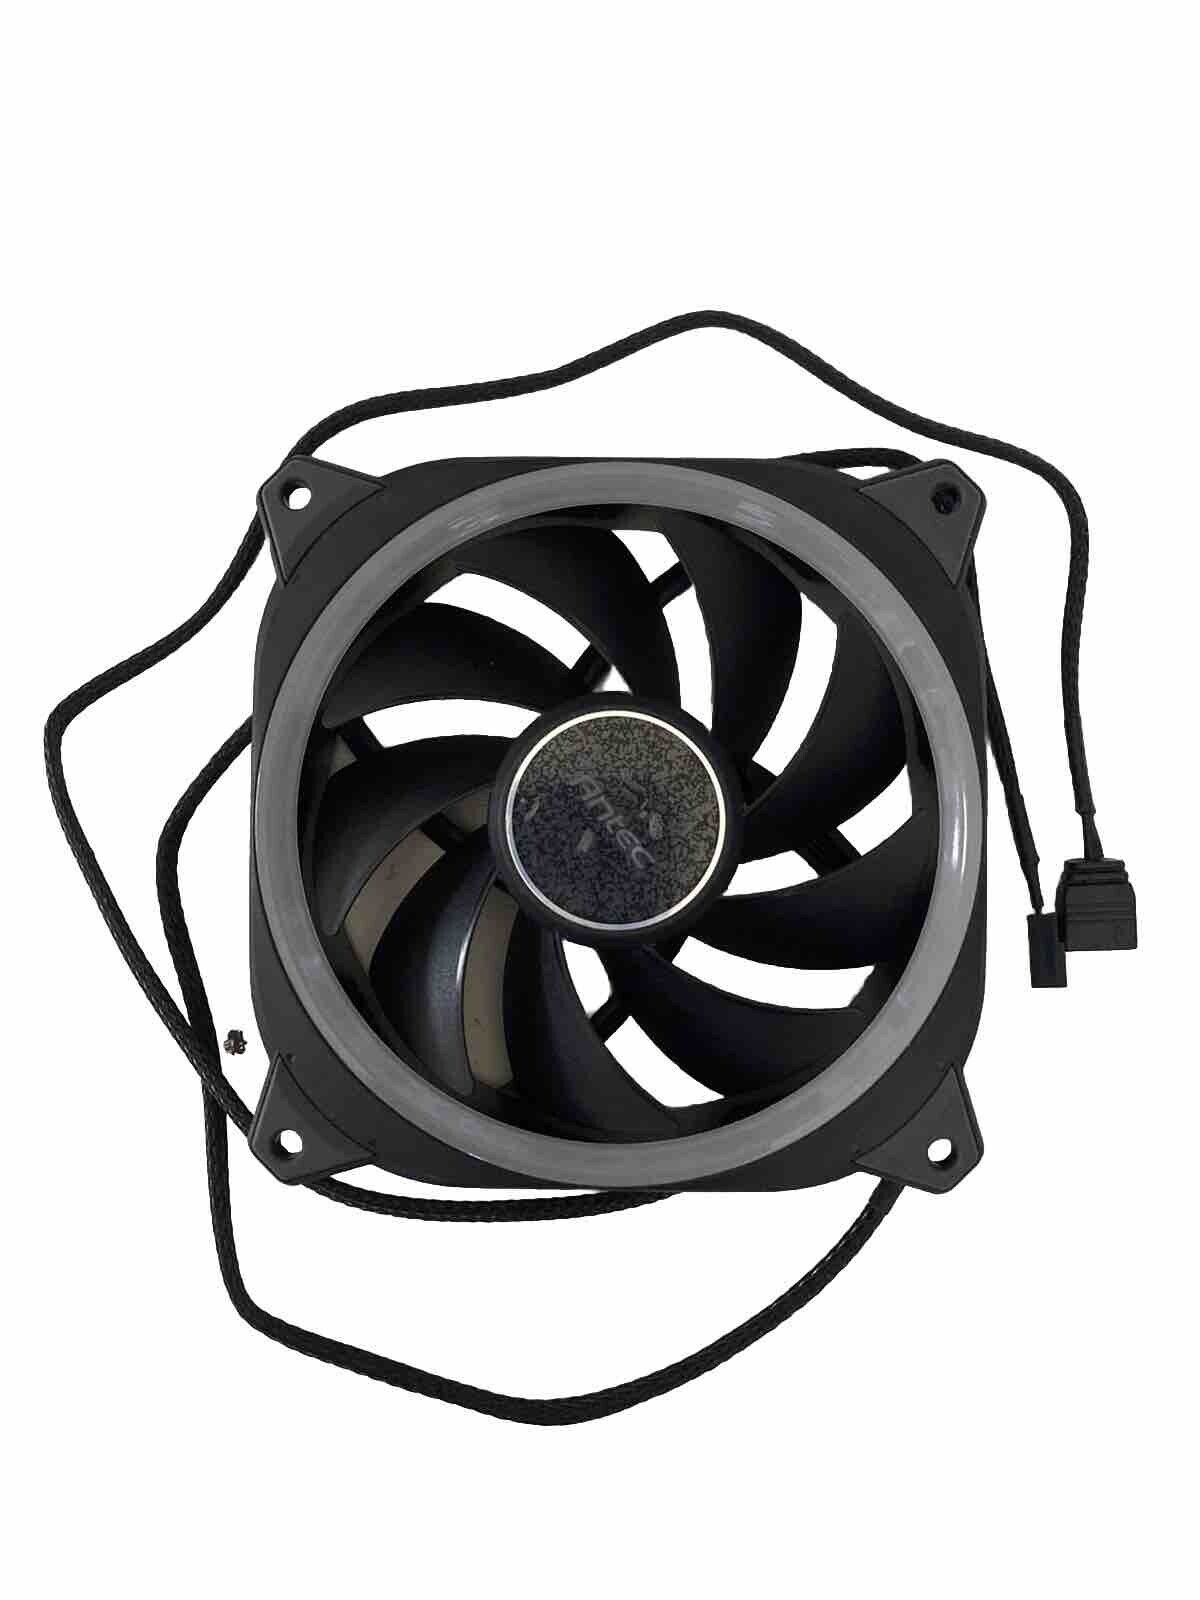 Antec Neo Prizm 12030 PC Fan 120mm X 30mm With RGB LEDs SINGLE